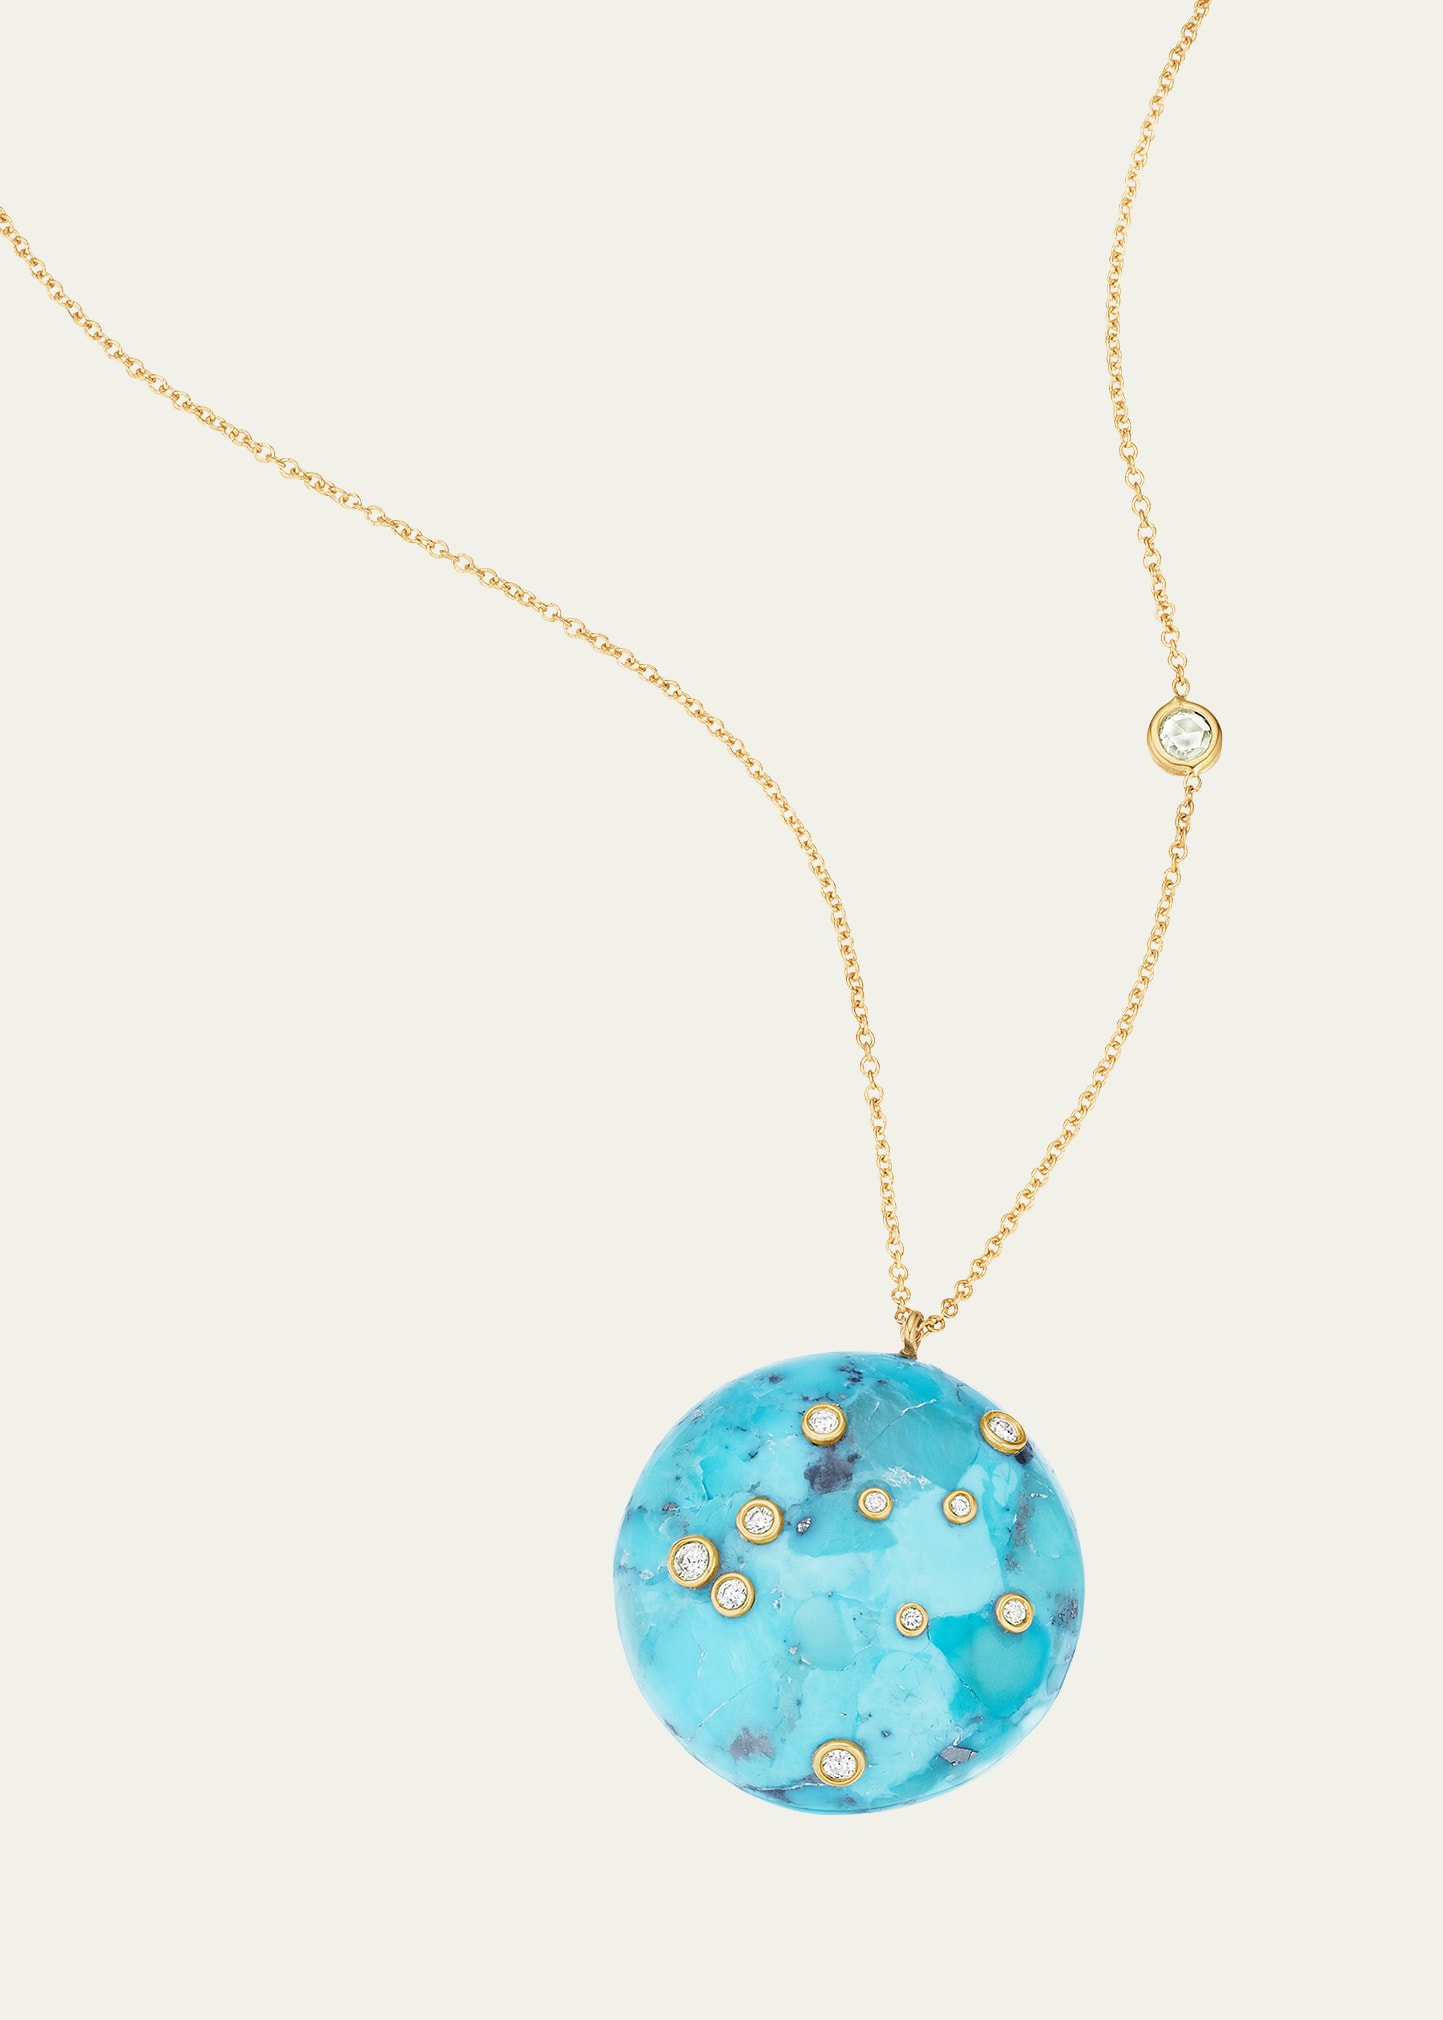 Constellation Turquoise Pendant Necklace with Diamonds